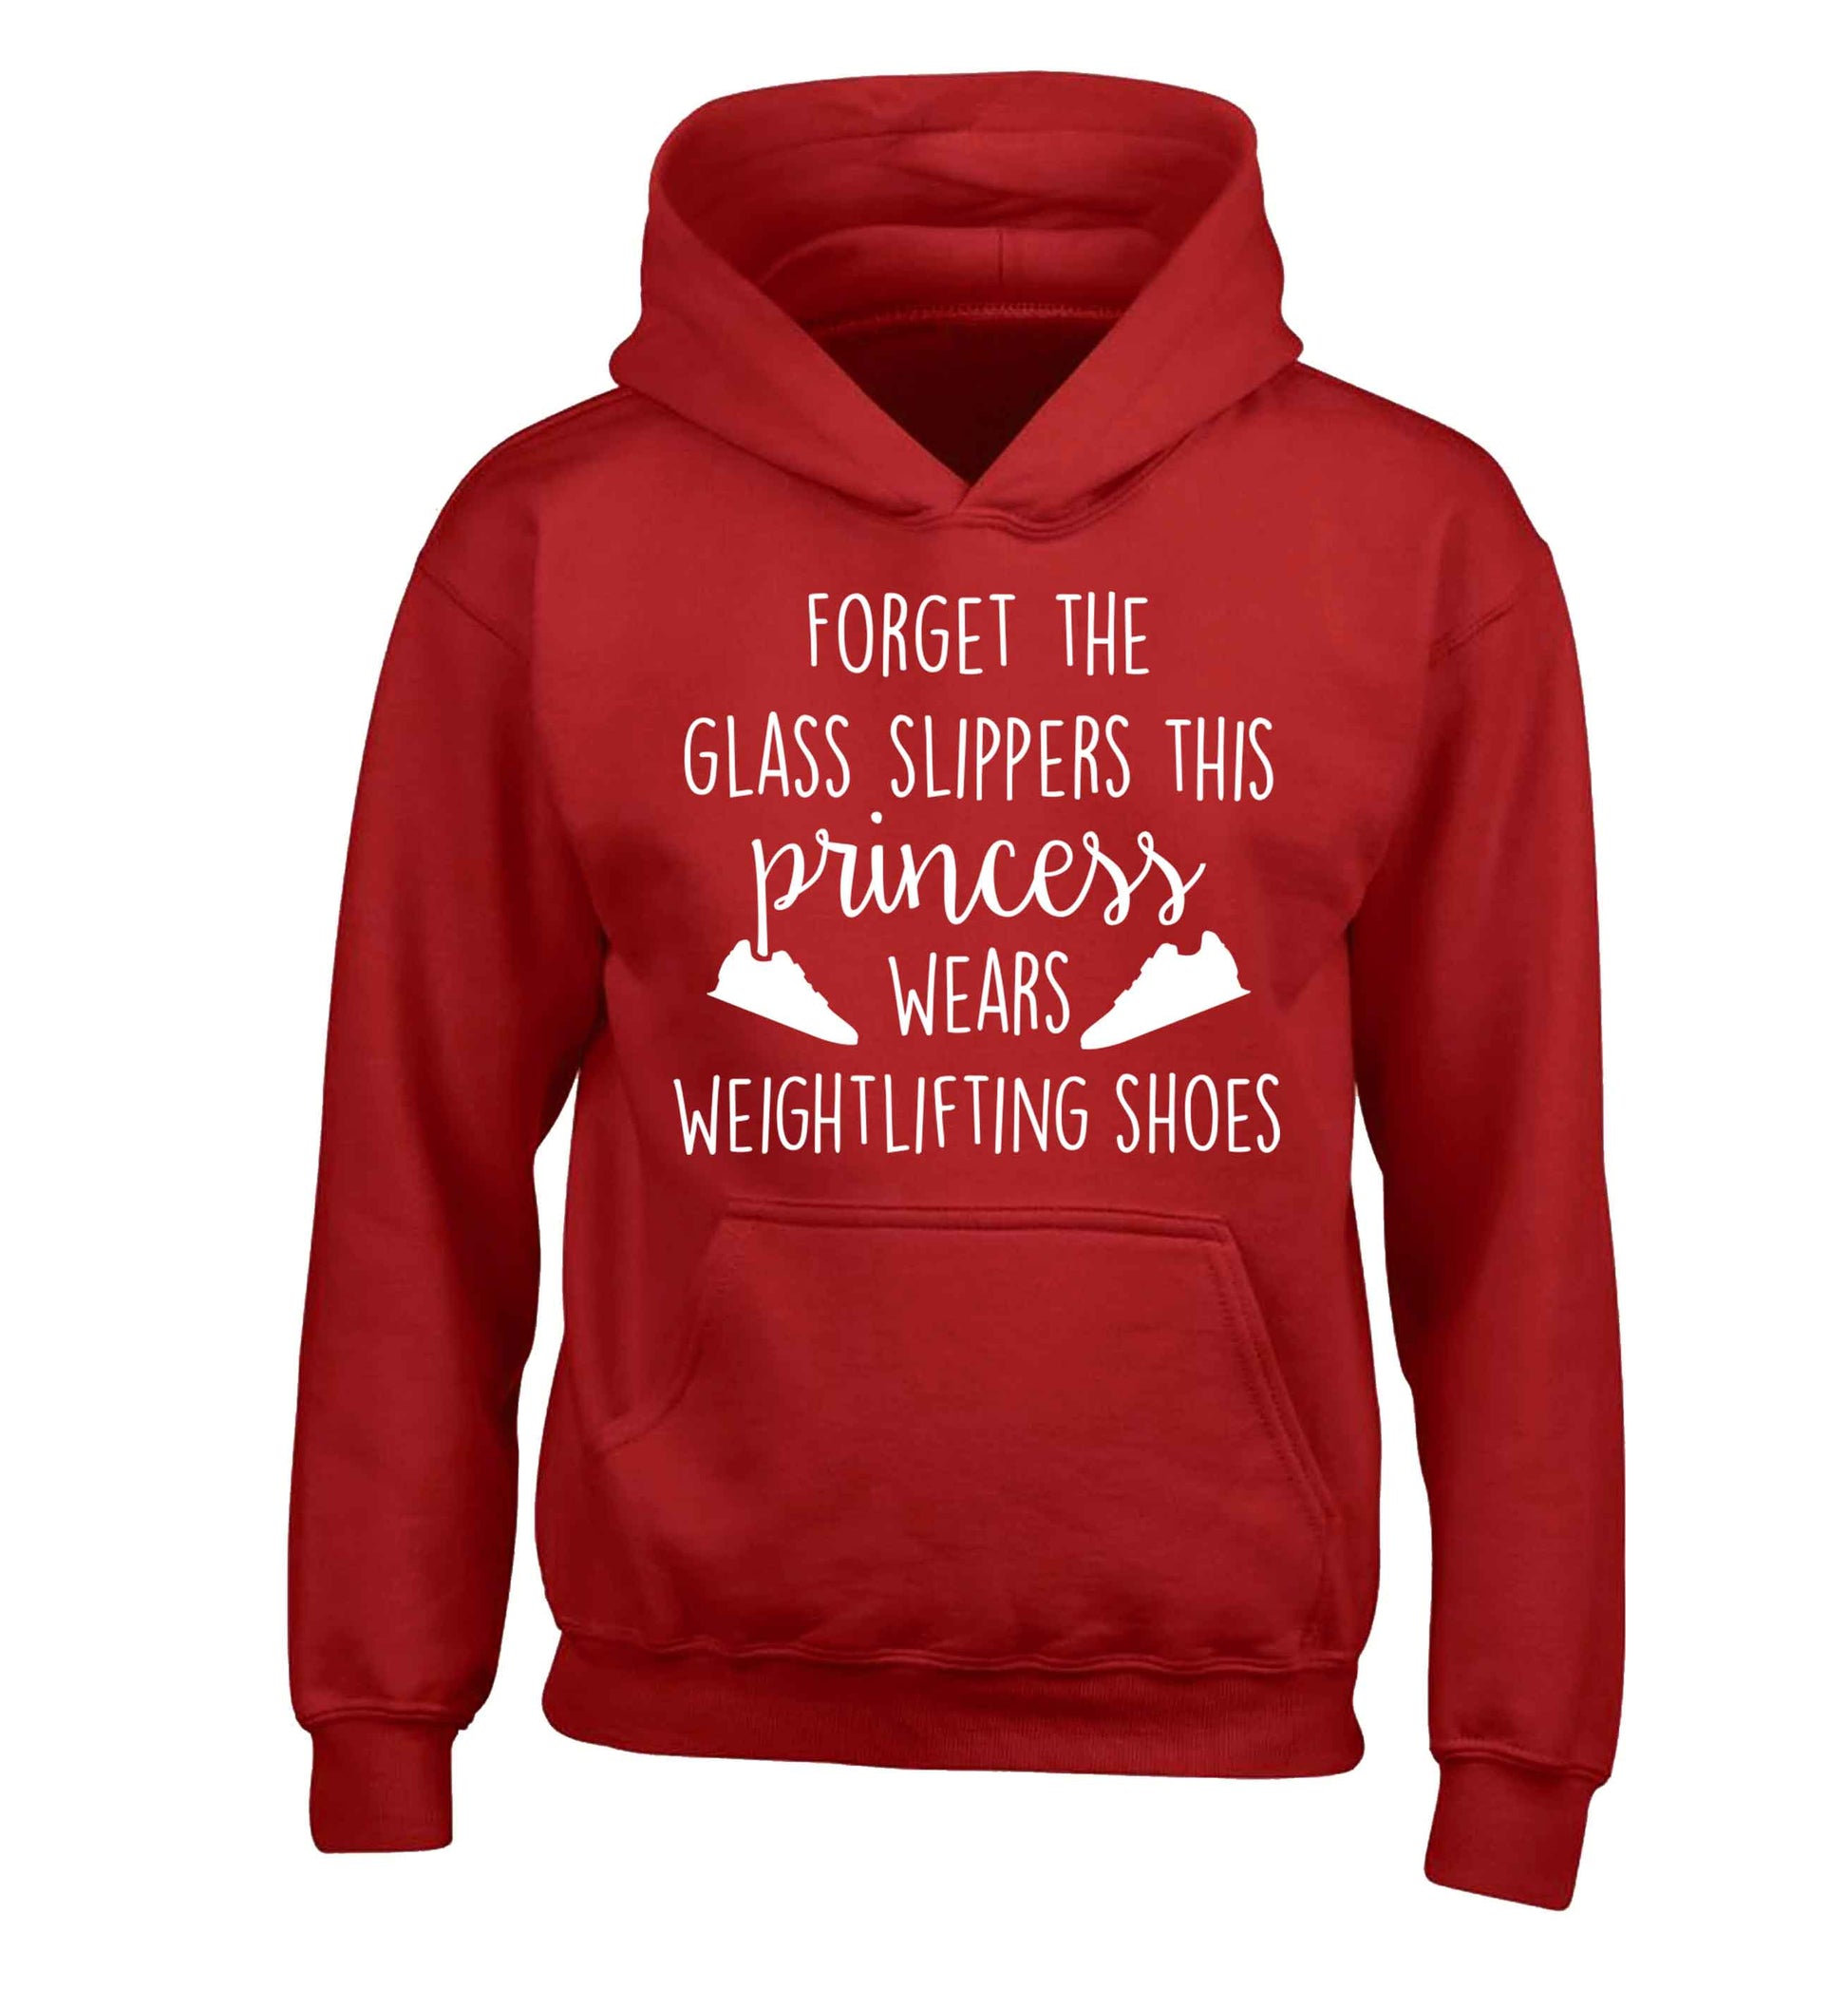 Forget the glass slippers this princess wears weightlifting shoes children's red hoodie 12-13 Years